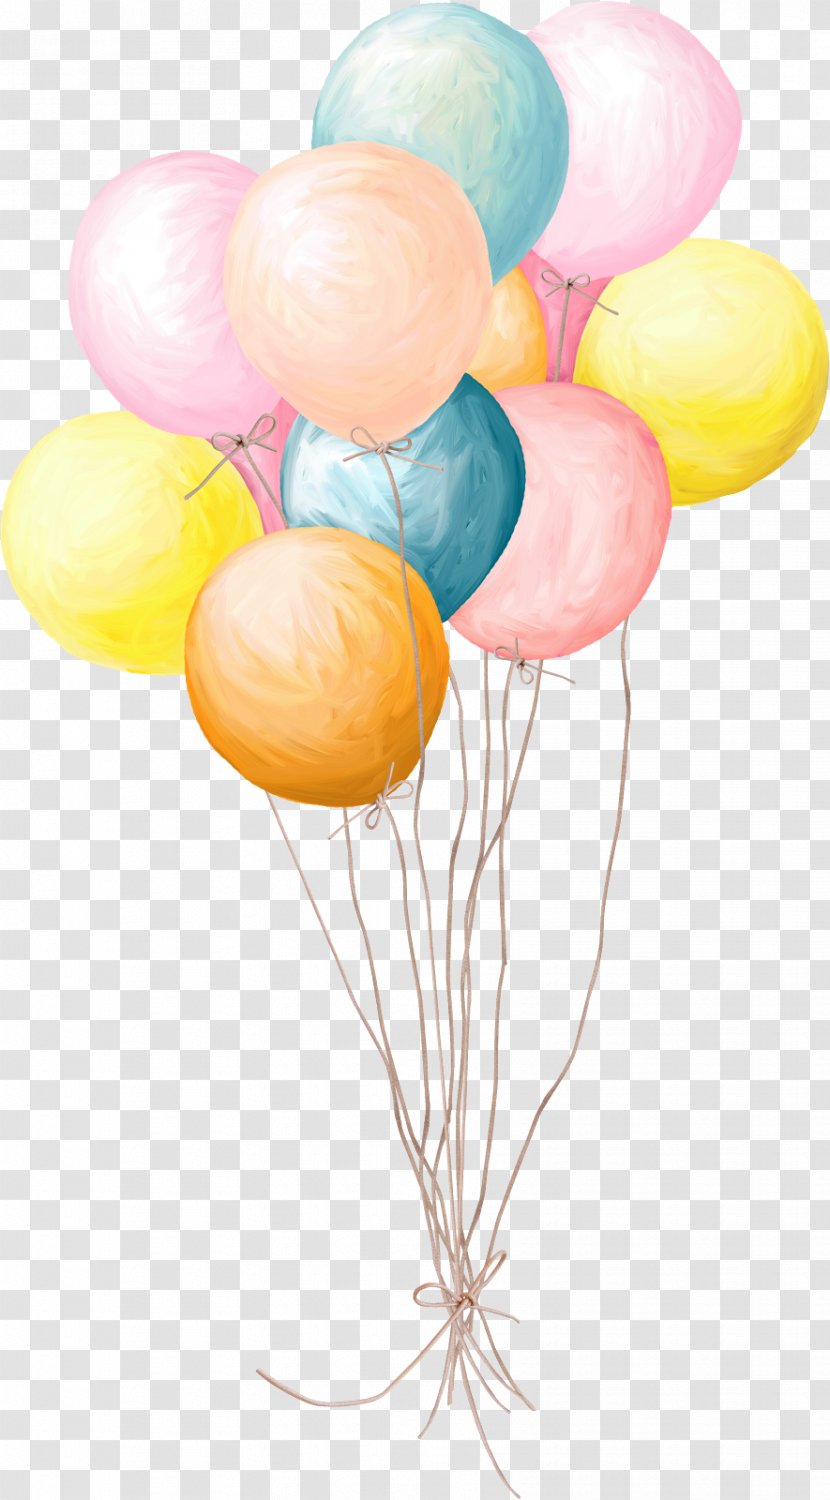 Clip Art Image Birthday Balloon - Watercolor Painting Transparent PNG